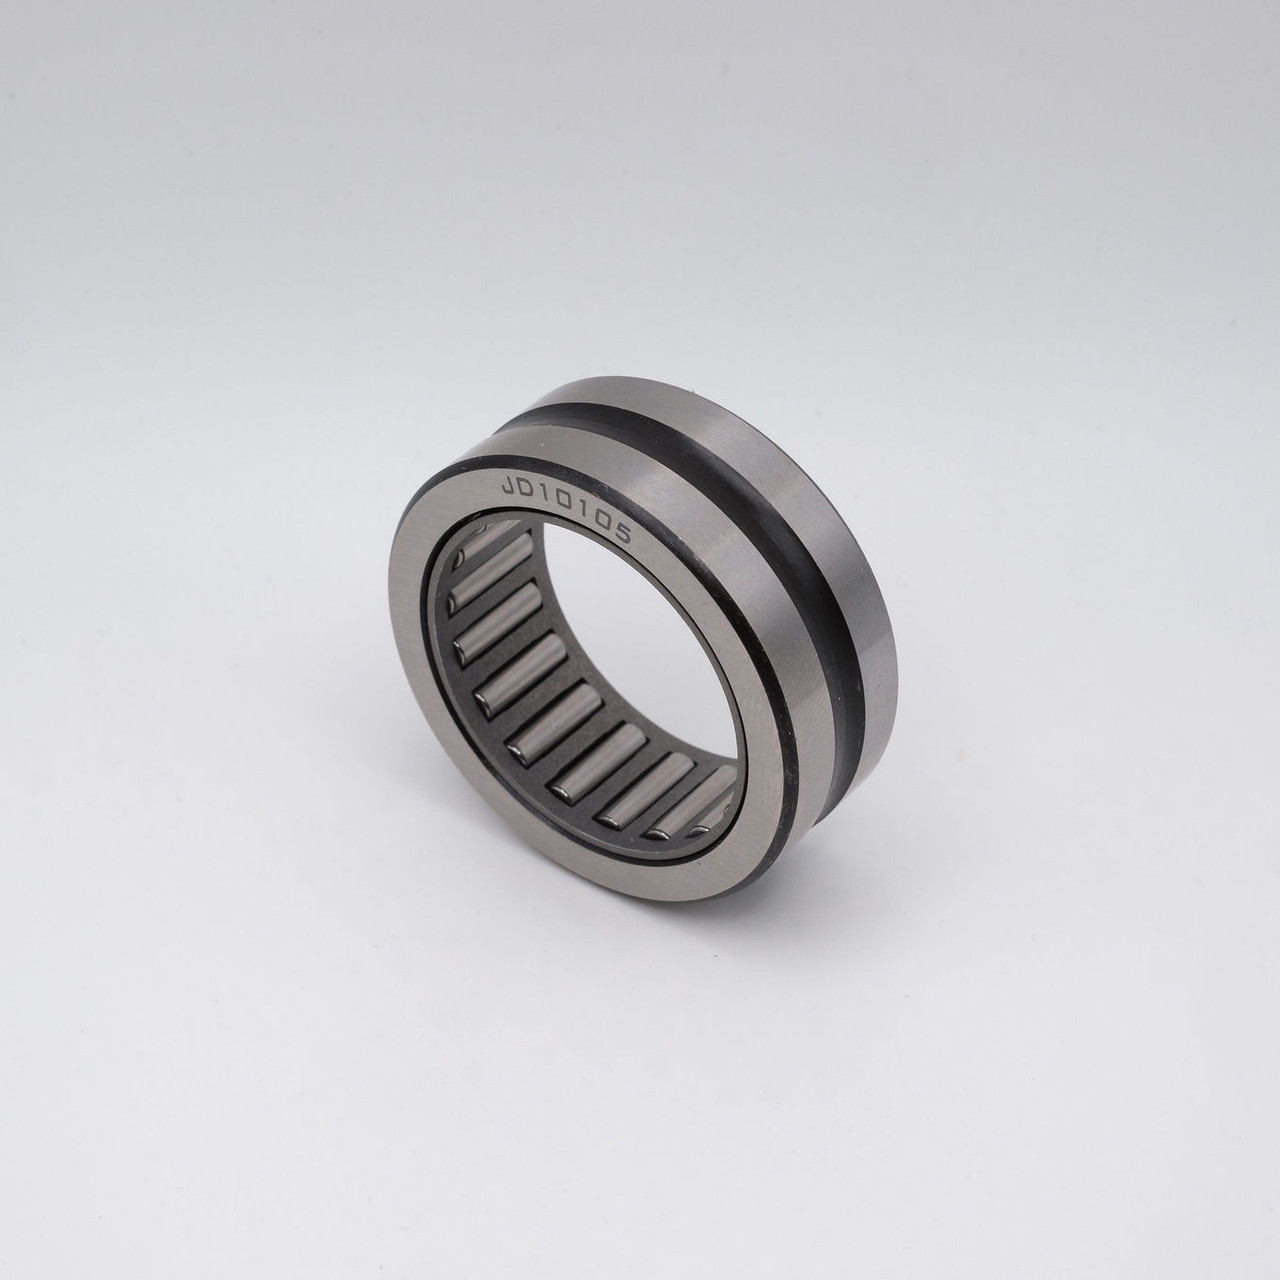 JD10105 Machined Needle Roller Bearing 32x17x45mm Front Right Angled View